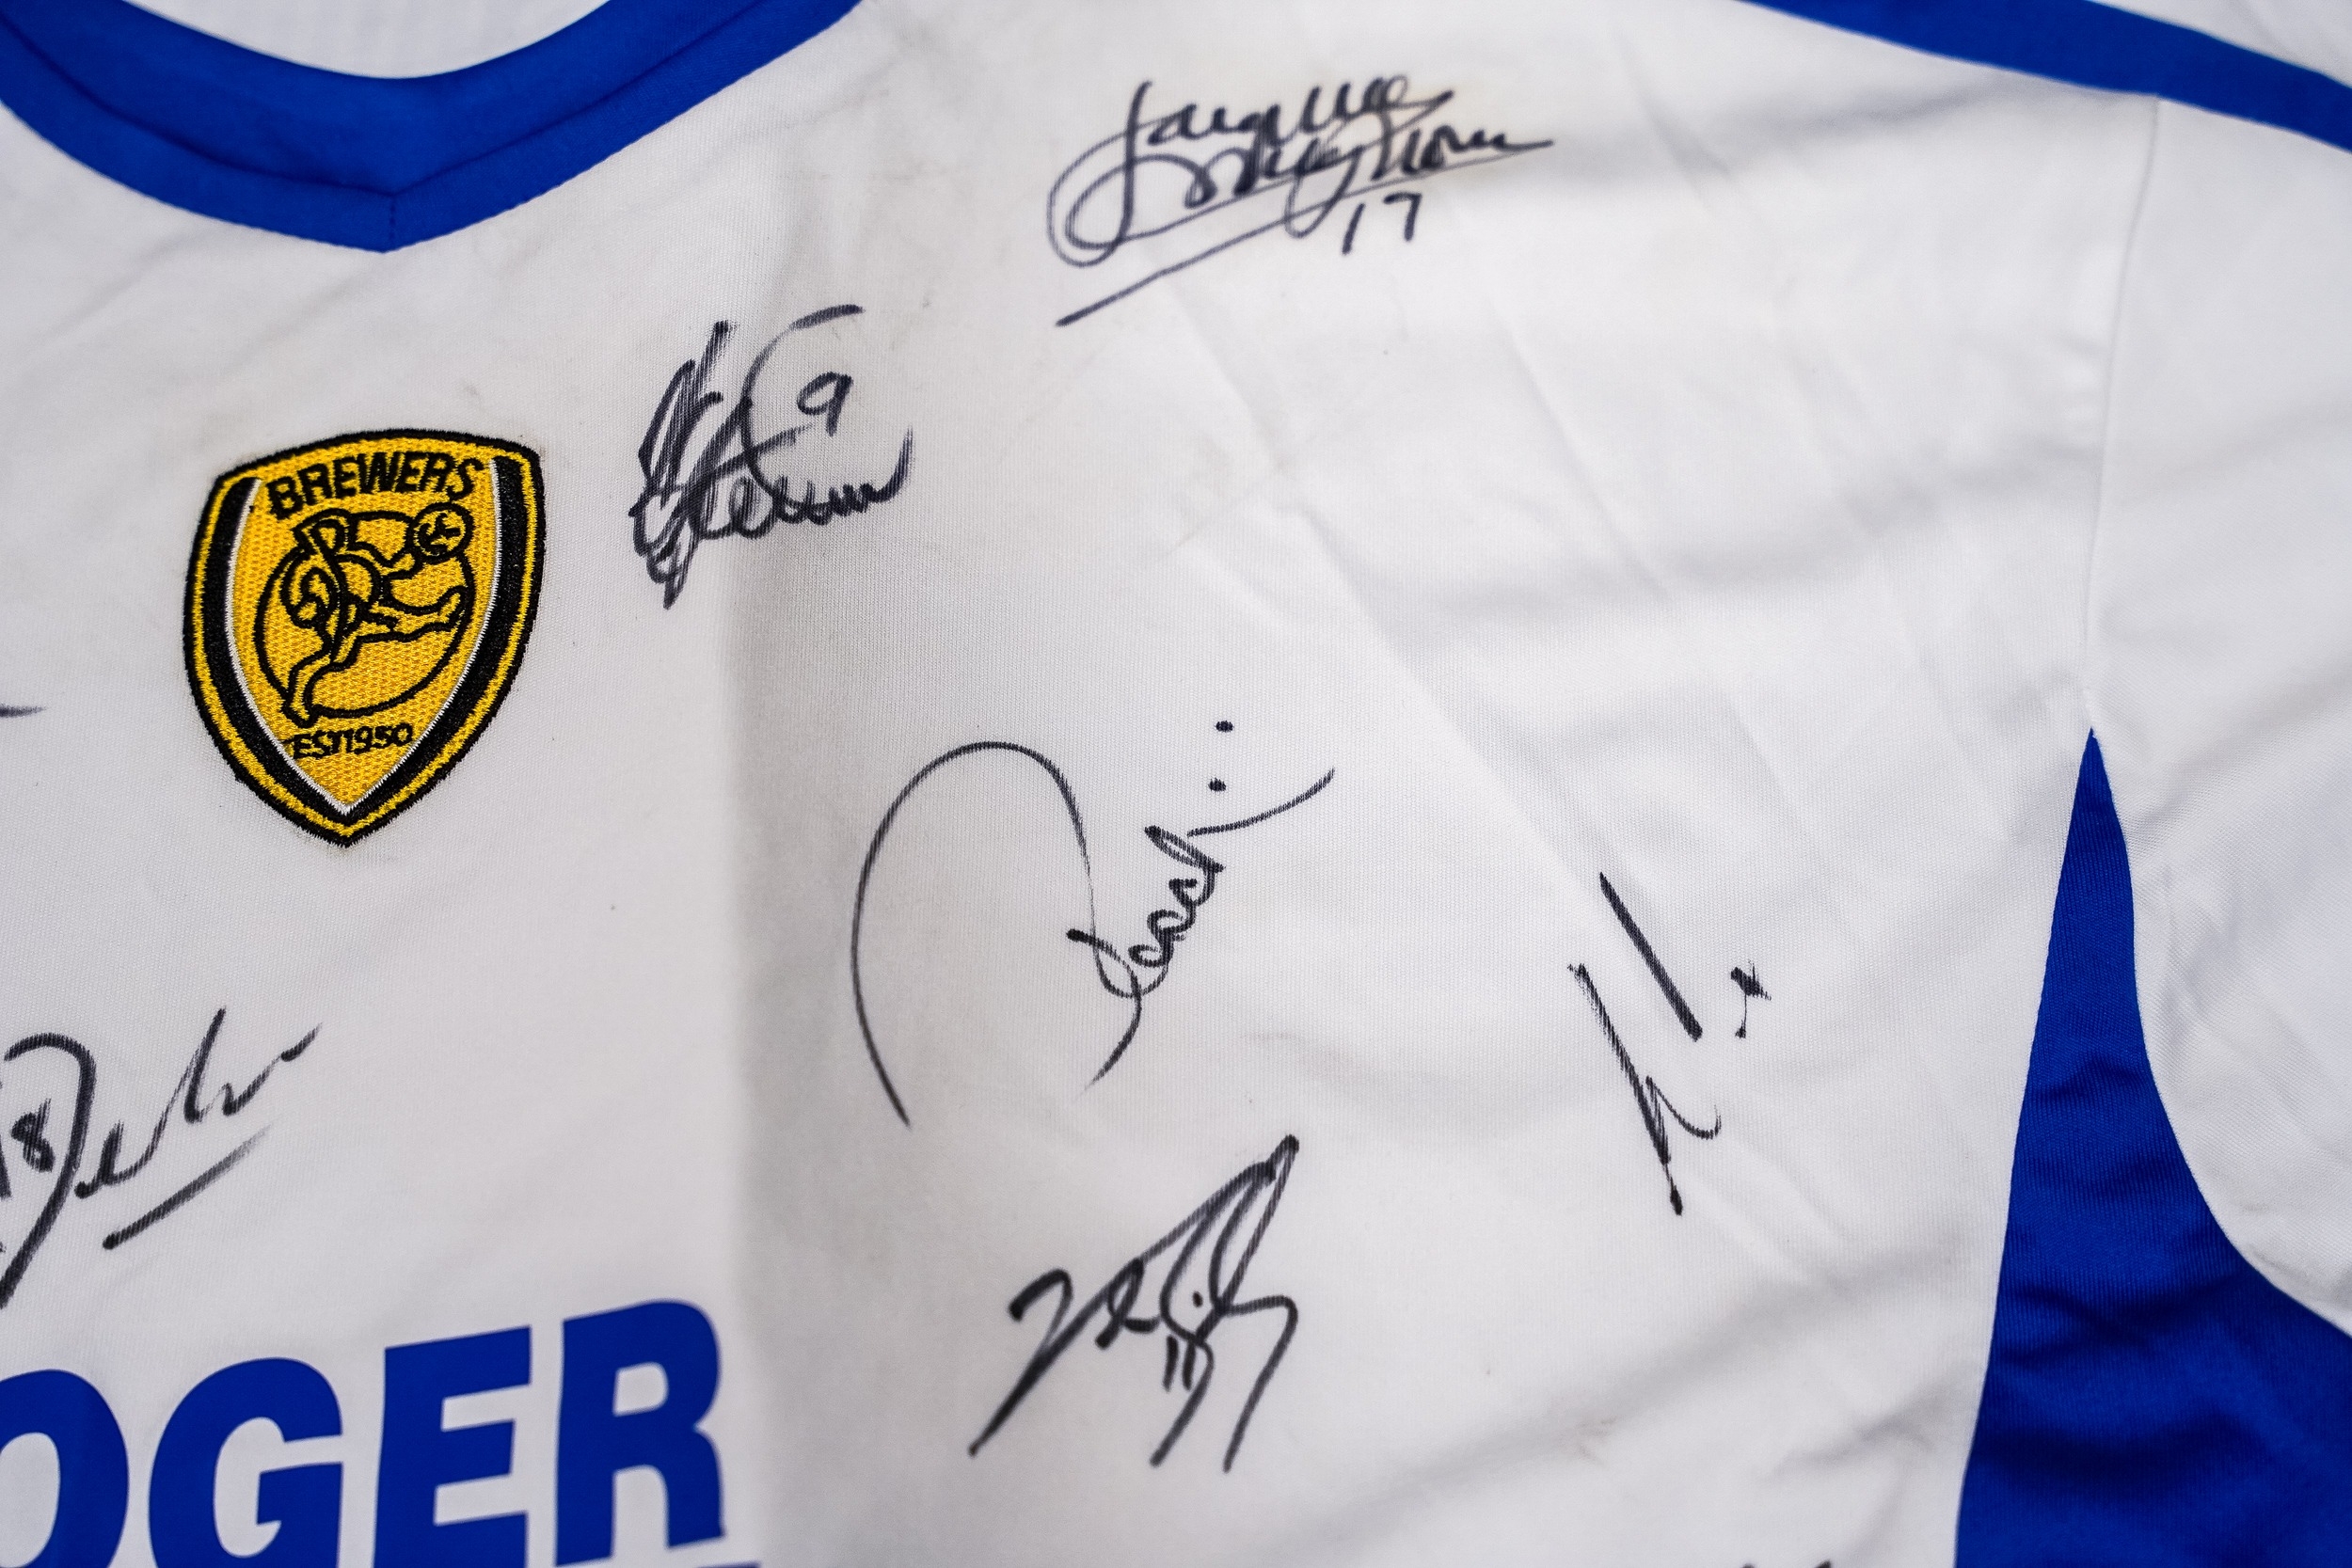 A Burton Albion Football club "The Brewers" signed shirt - Image 5 of 7